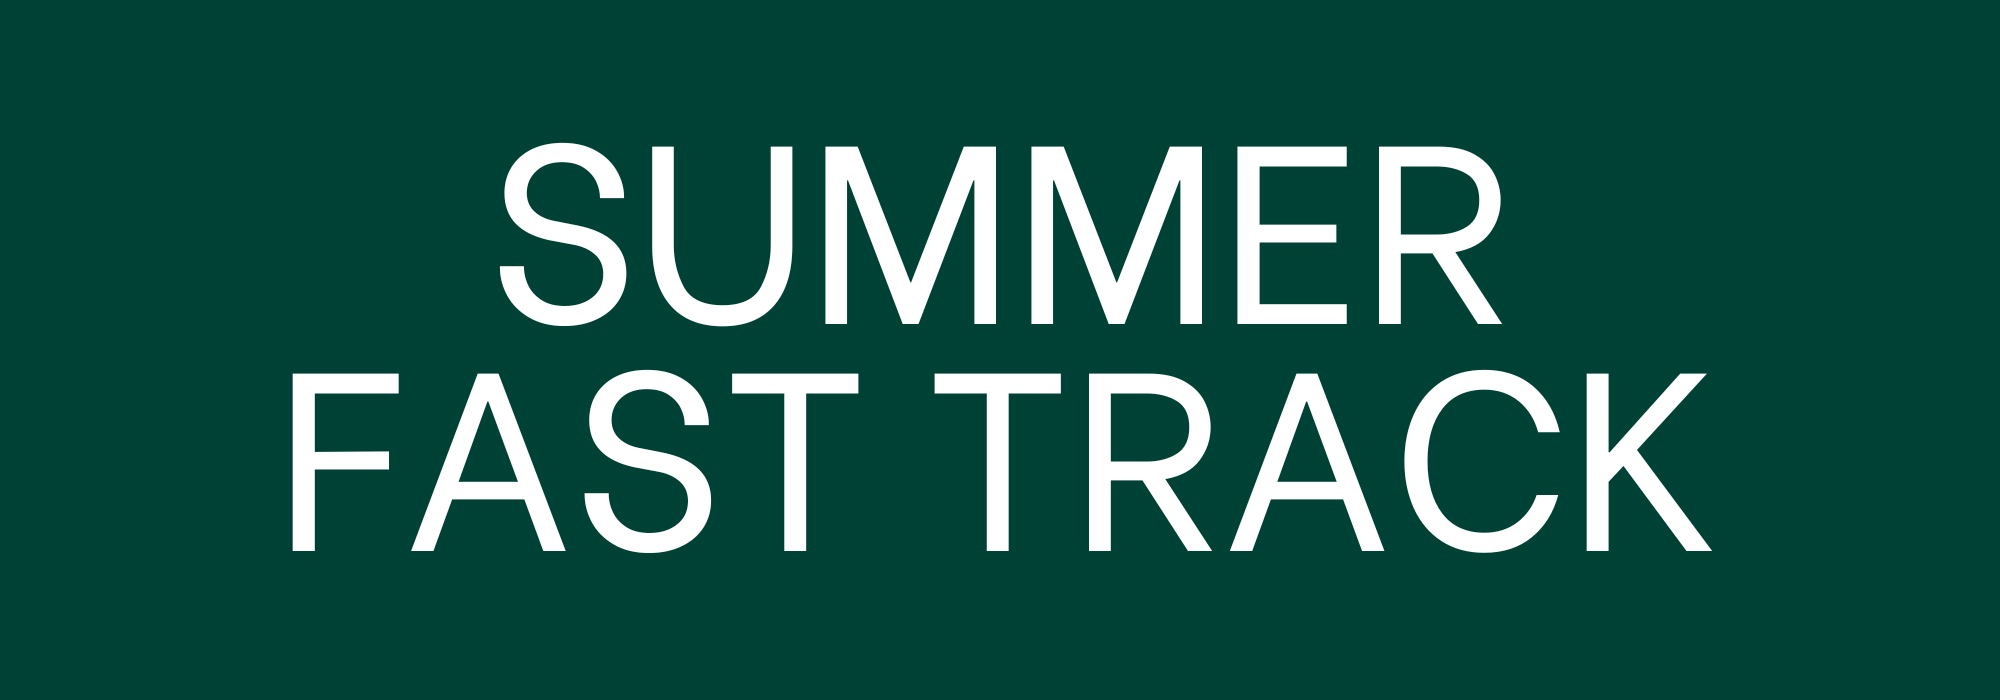 summer fast track scholarship web page